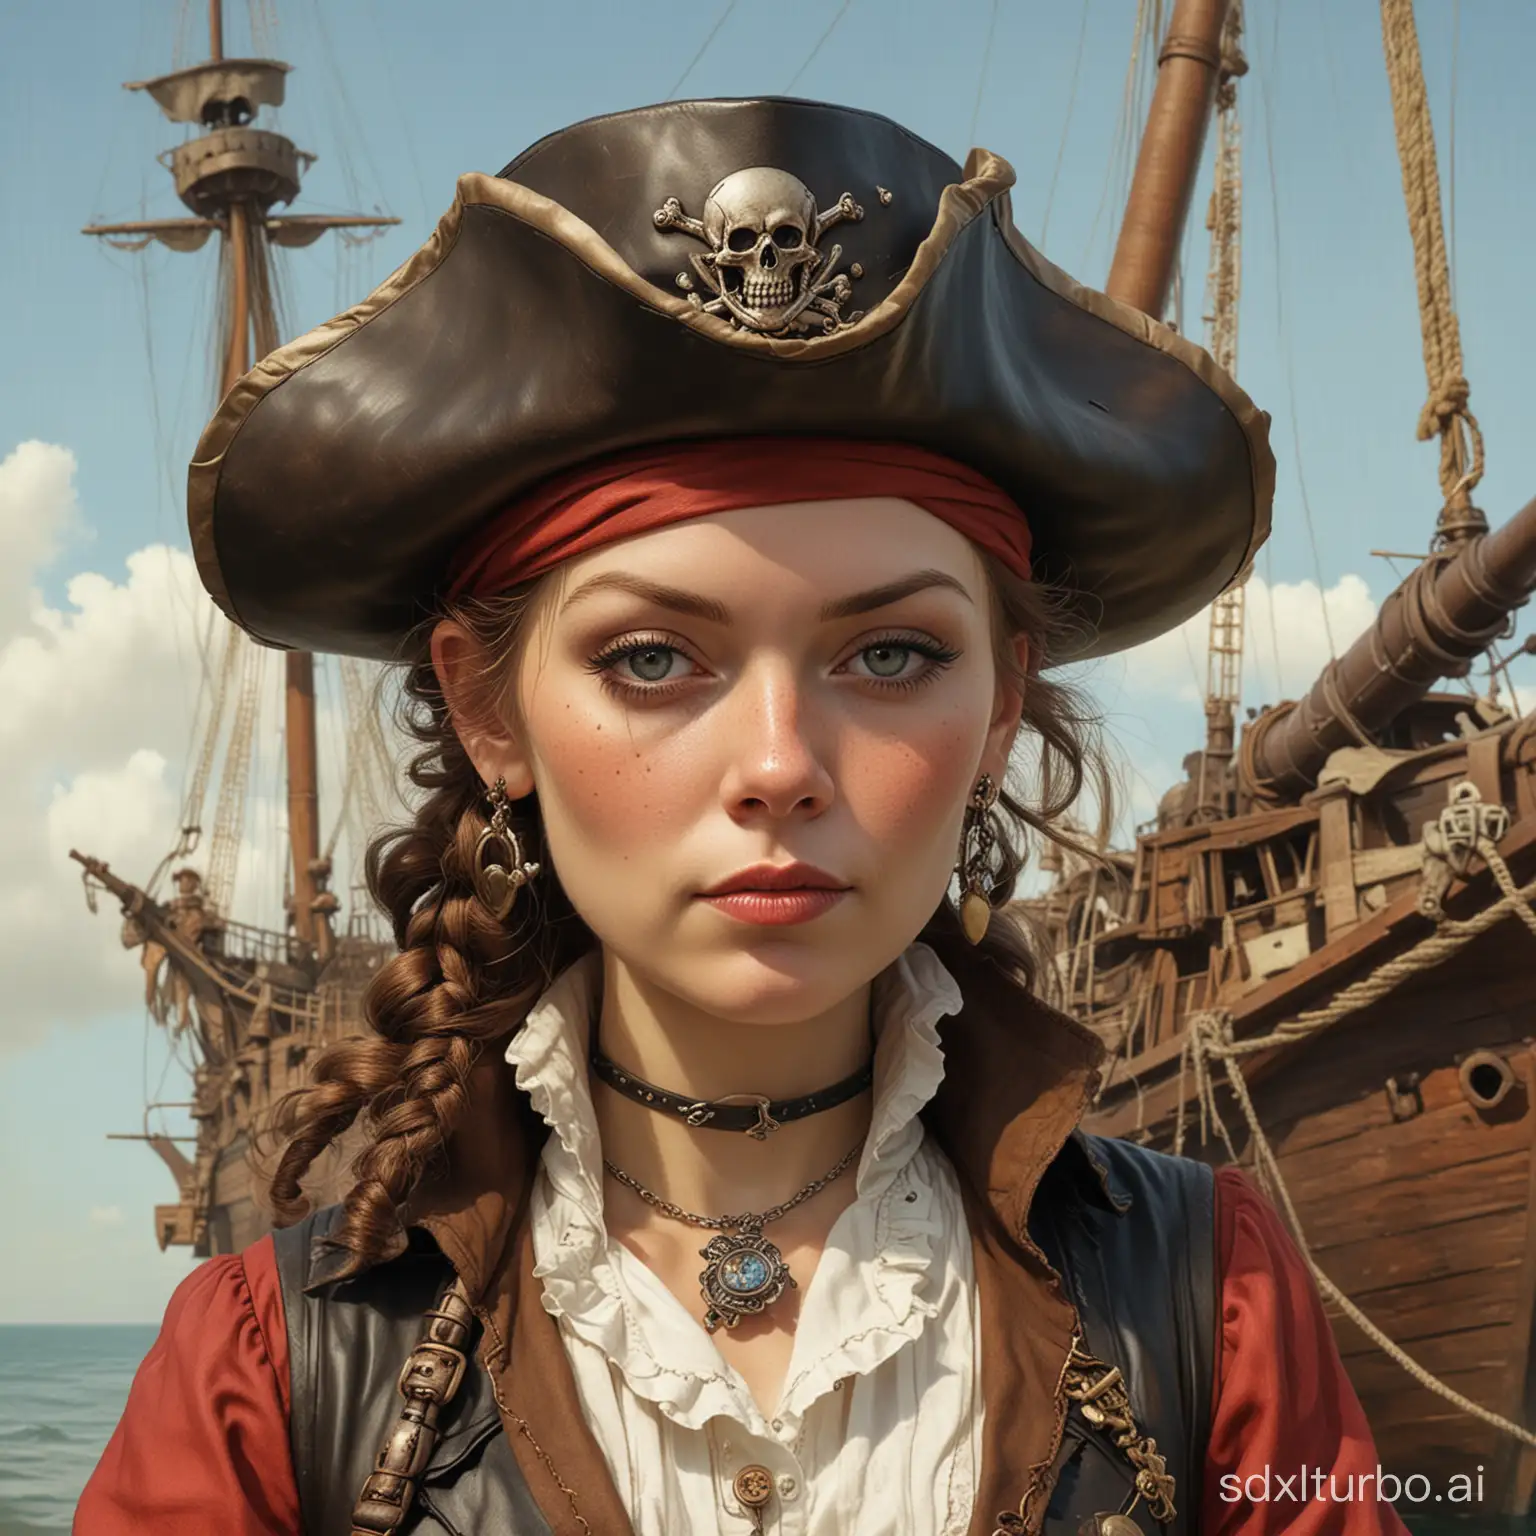 Charismatic-Pirate-Lady-with-Greg-Simkins-Norman-Rockwell-and-Isaac-Cordal-Artistic-Influences